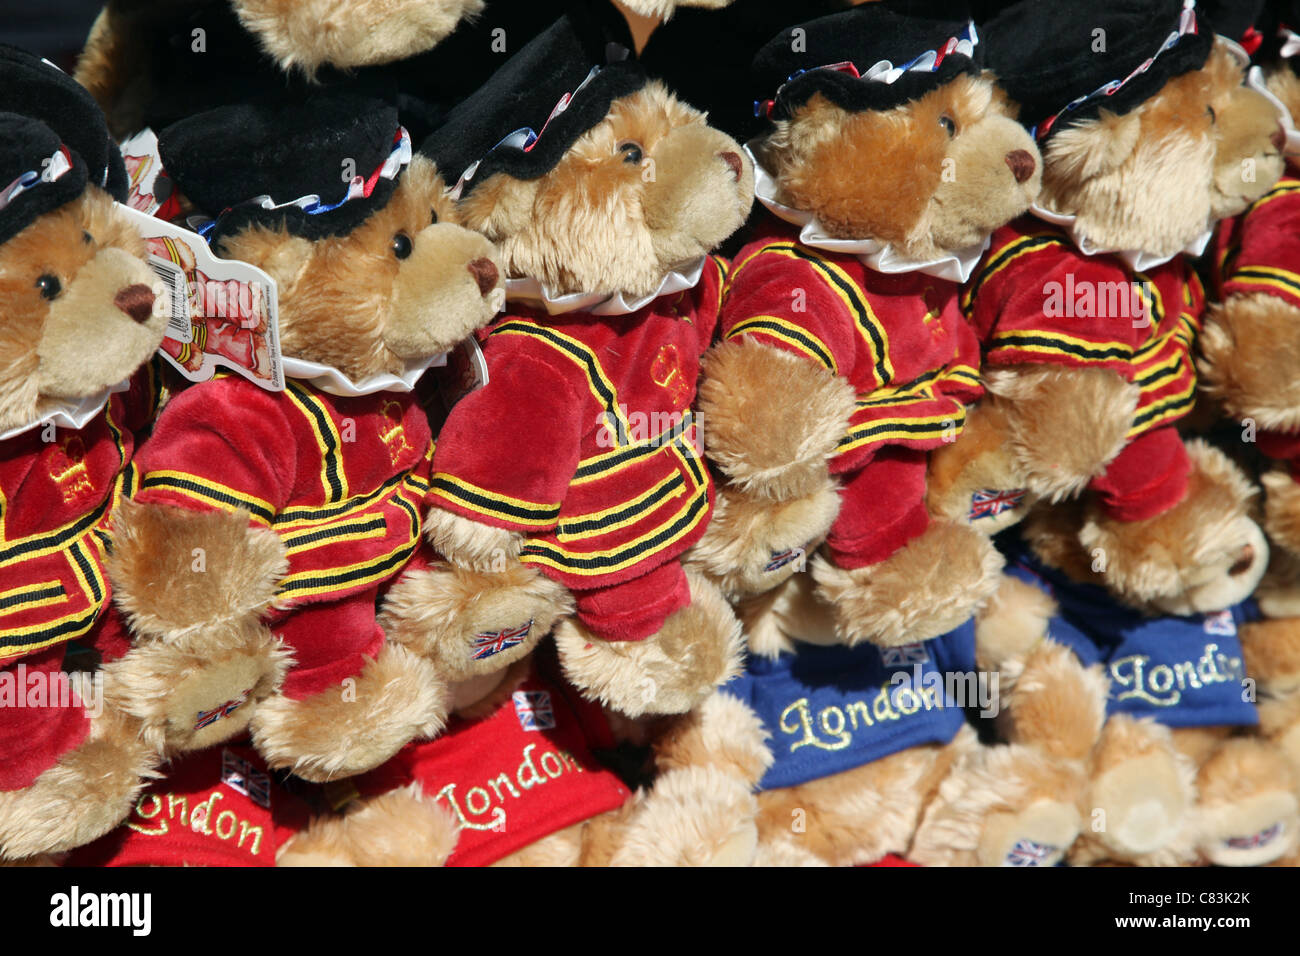 Teddy Bears for sale in a London shop Stock Photo